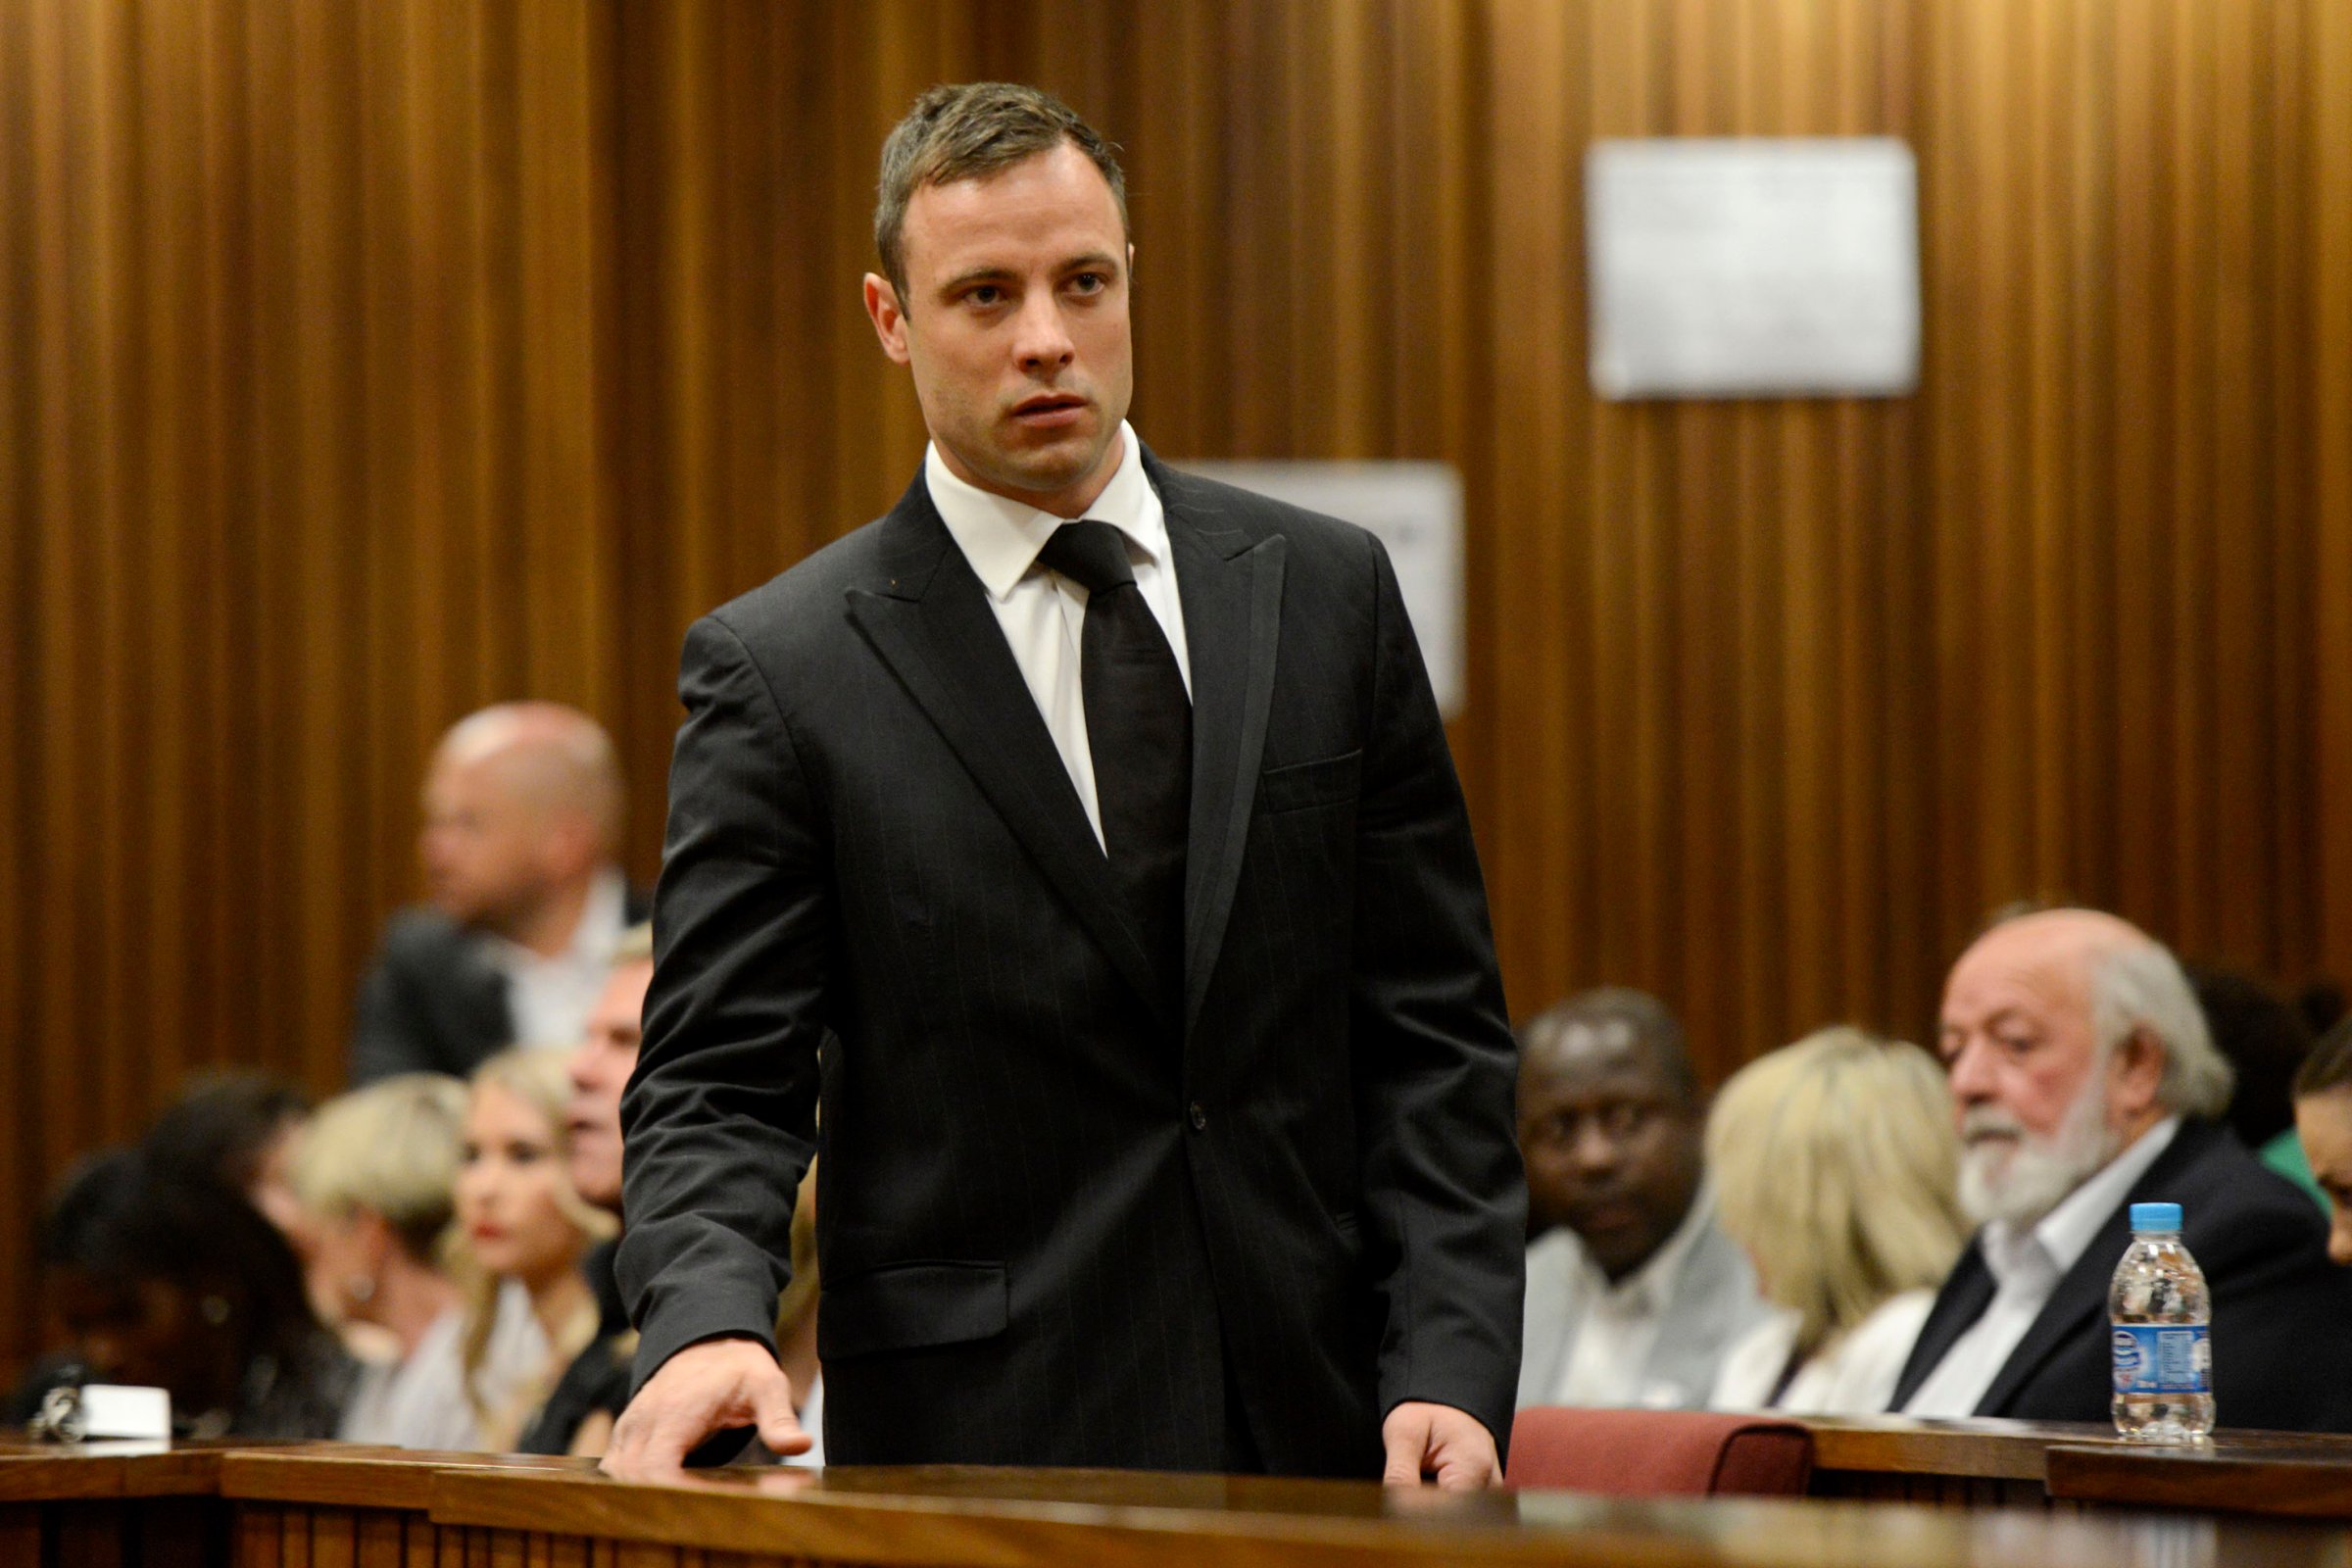 South African Olympic and Paralympic track star Oscar Pistorius attends his sentencing at the North Gauteng High Court in Pretoria